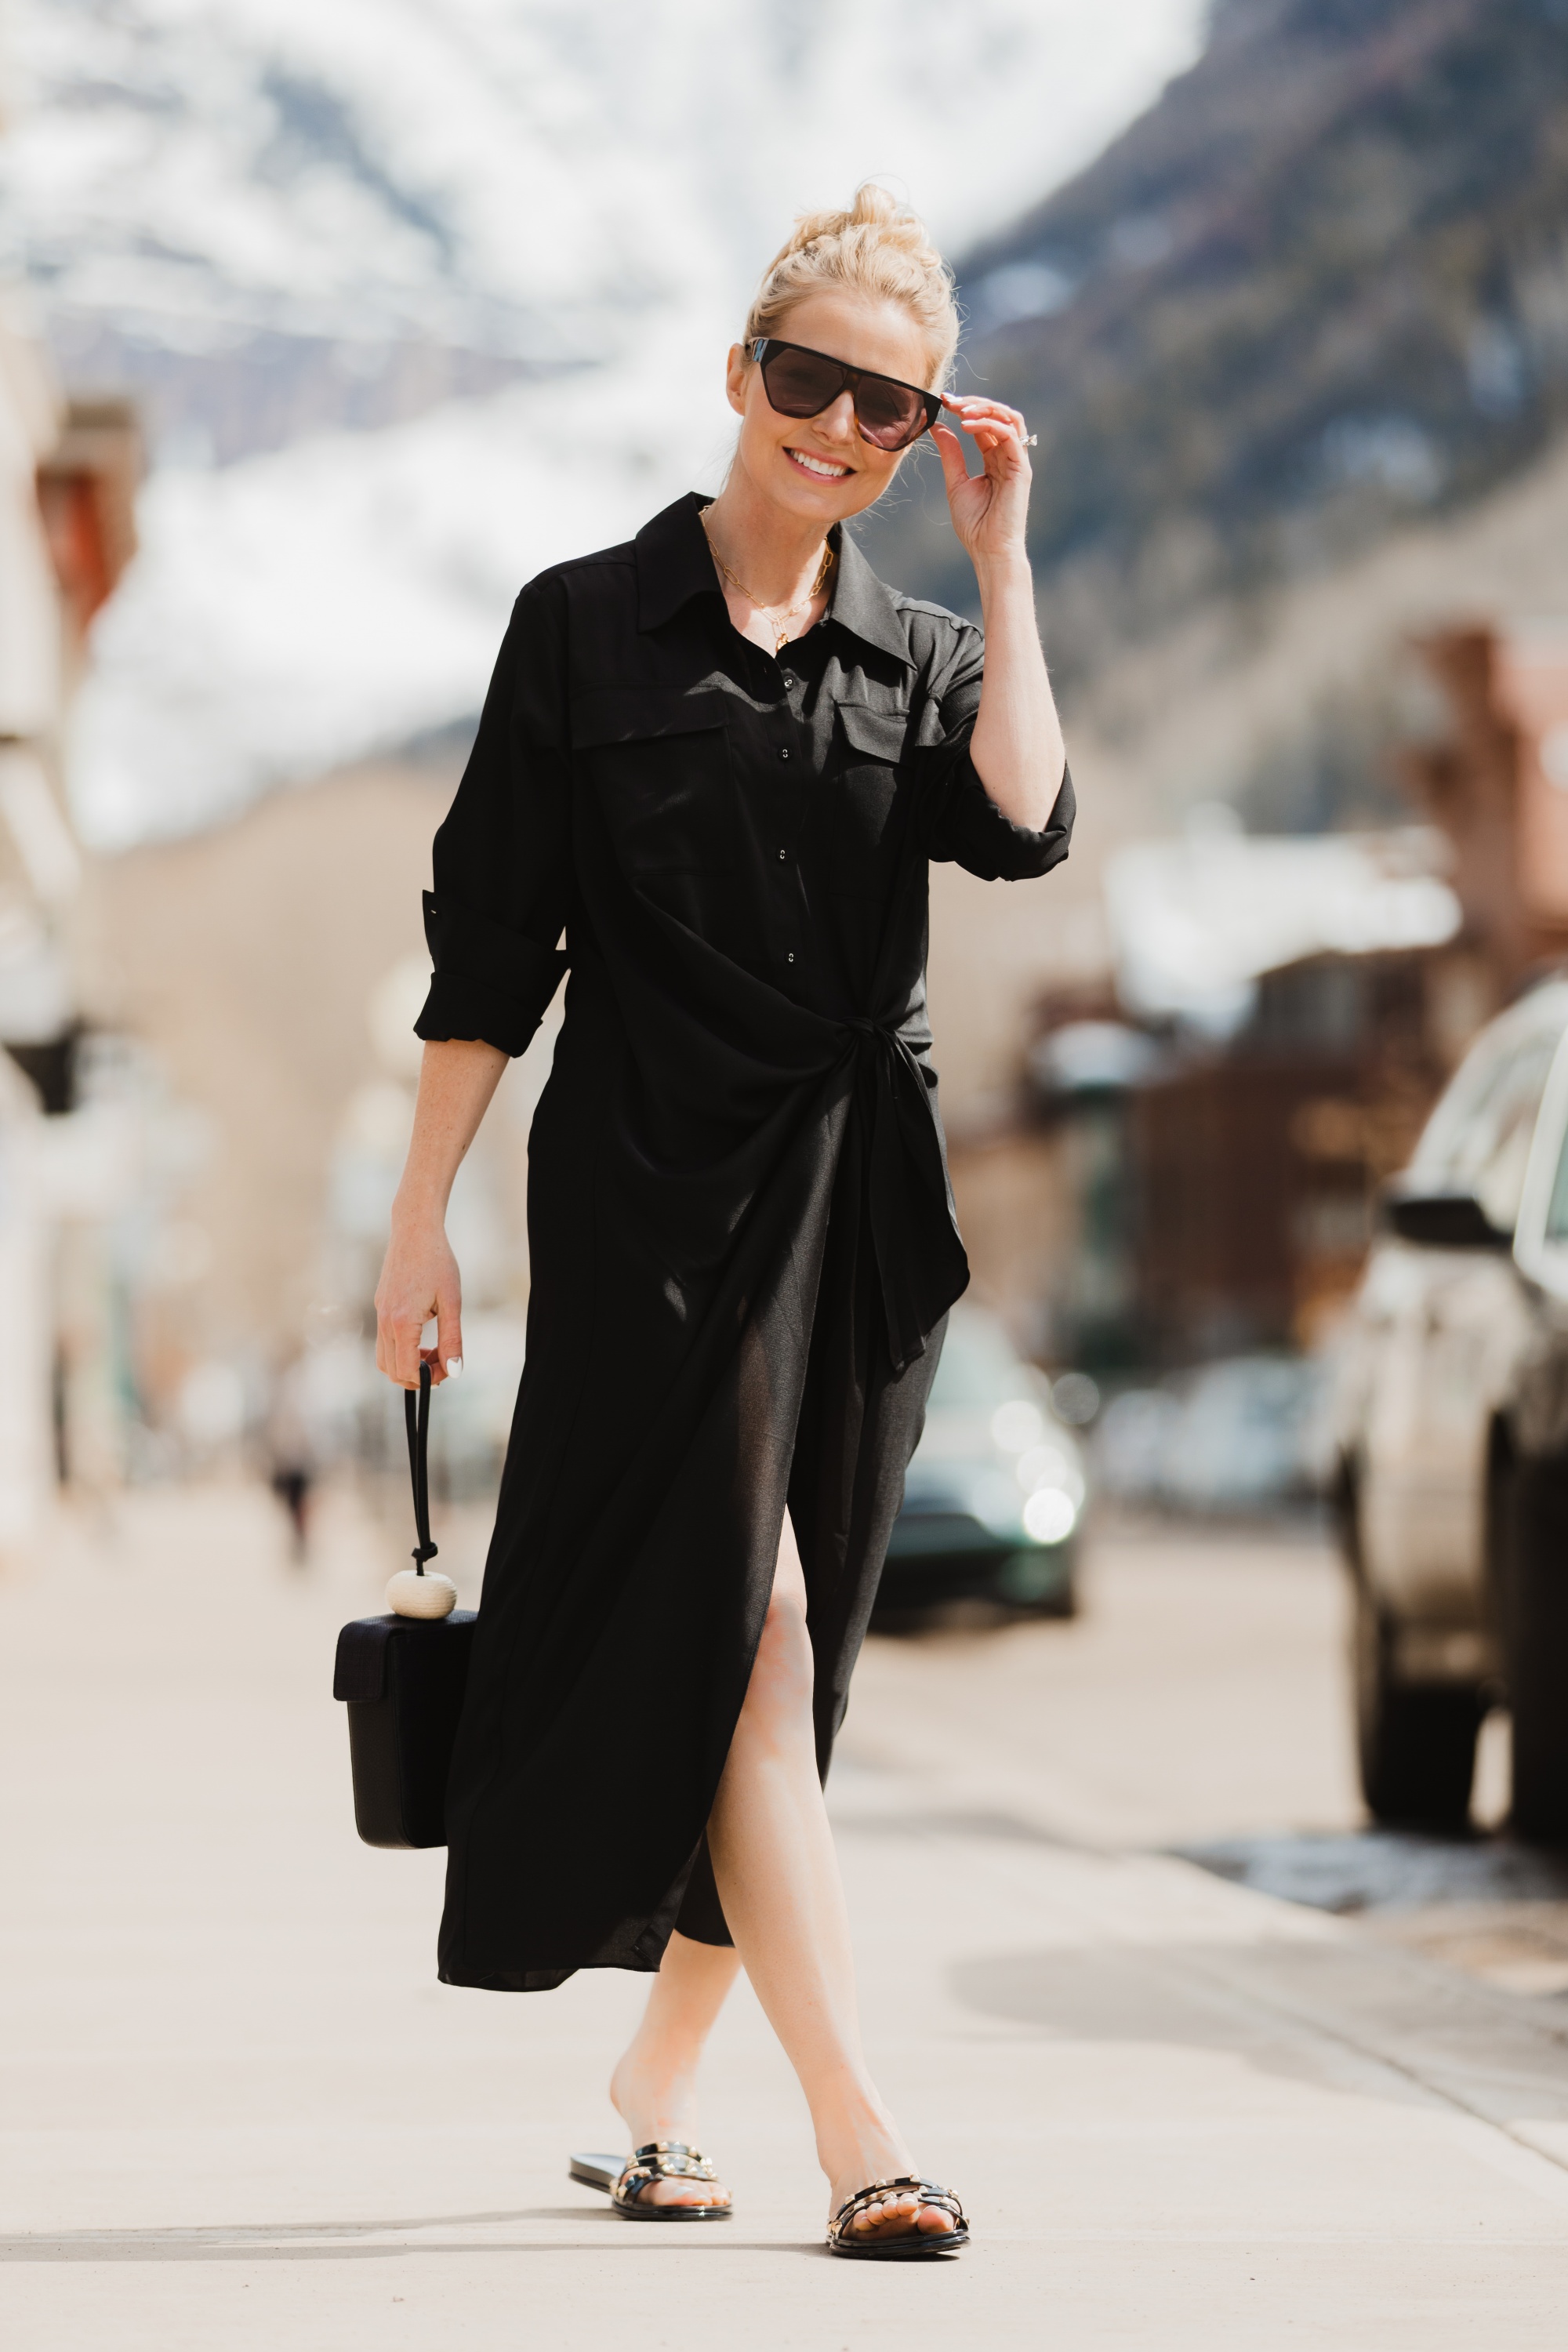 Spring Accessories, Fashion blogger Erin Busbee of BusbeeStyle.com wearing a black L'Academie shirt dress with black studded strappy slides and black bracelet bag from Vince Camuto in Telluride, Colorado